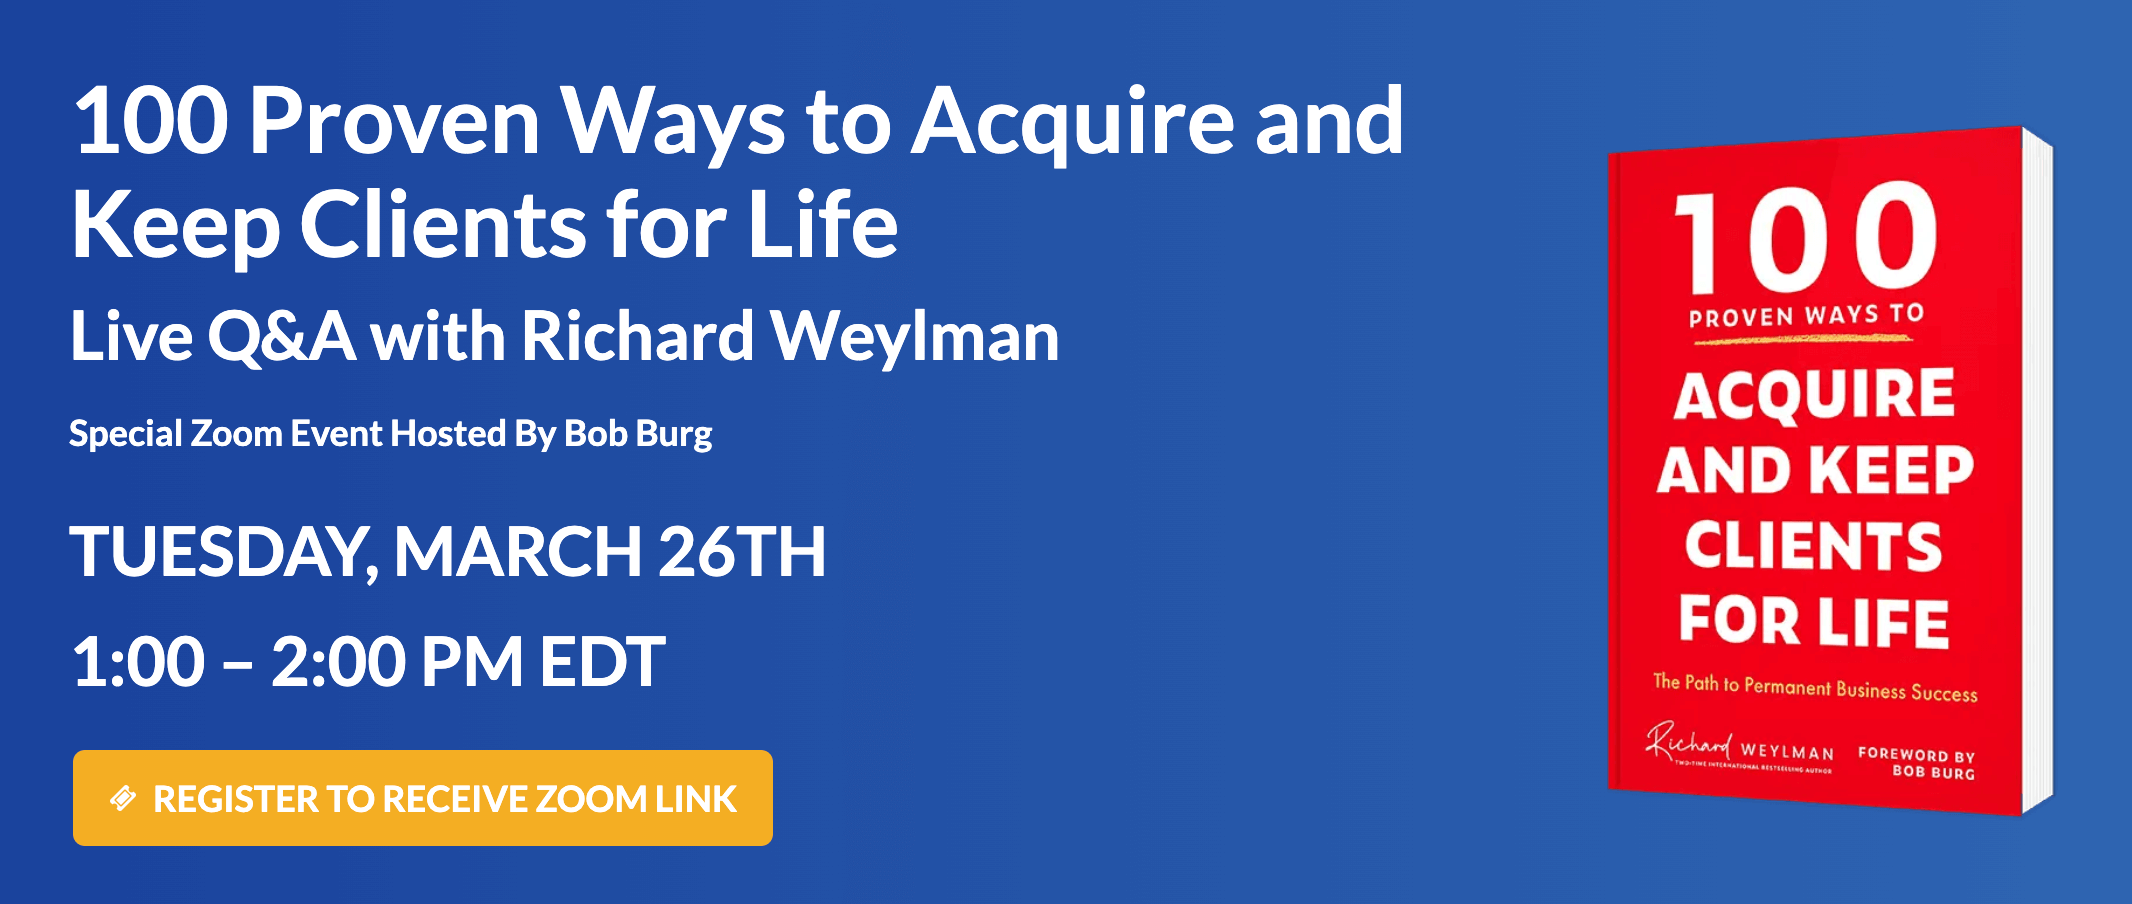 Richard Weylman - 100 Proven Ways to Acquire and Keep Clients for Life